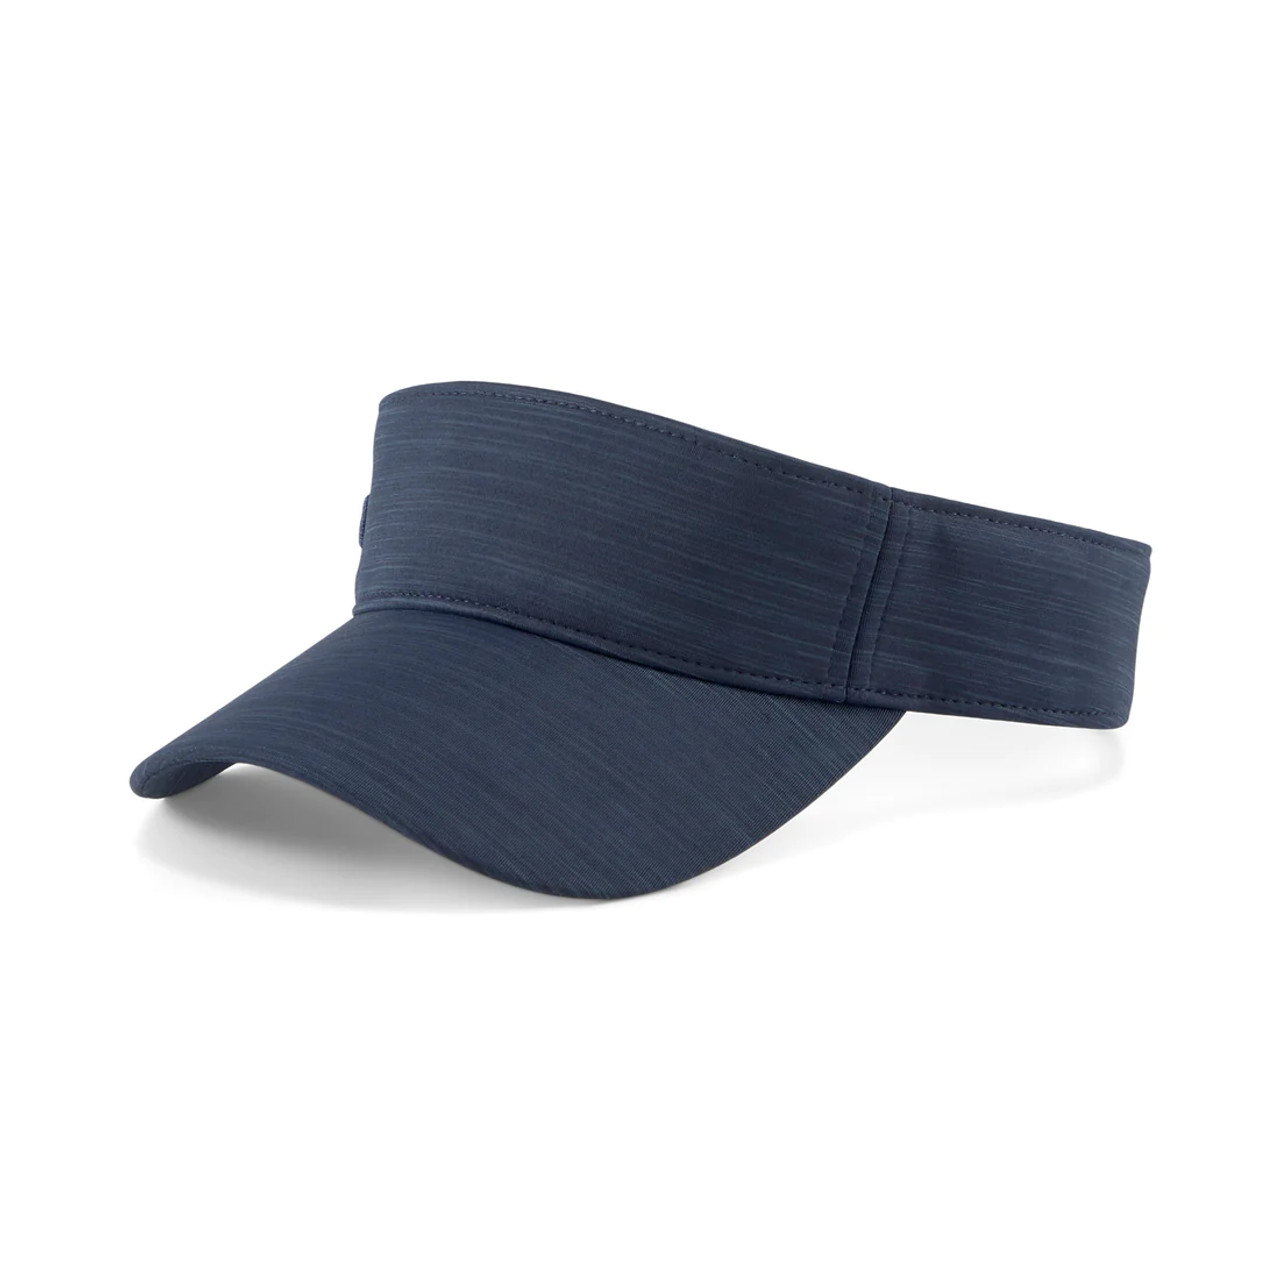 Puma Women's Sport P Golf Visor - Navy Blazer - Fore Ladies - Golf Dresses  and Clothes, Tennis Skirts and Outfits, and Fashionable Activewear